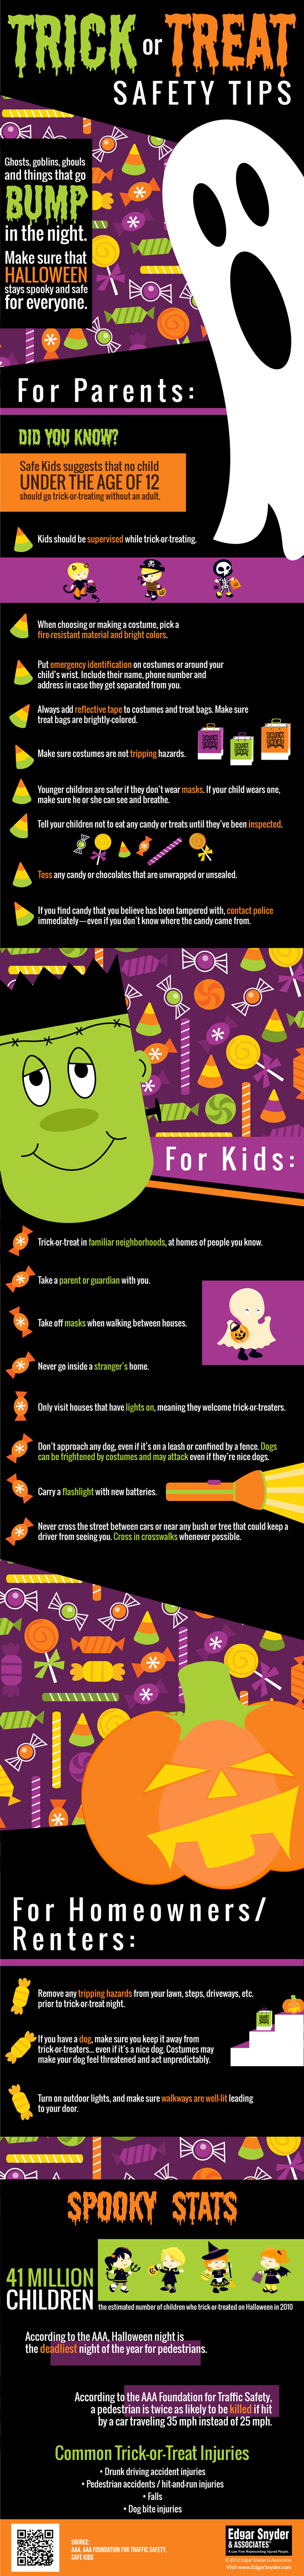 halloween-safety-infographic